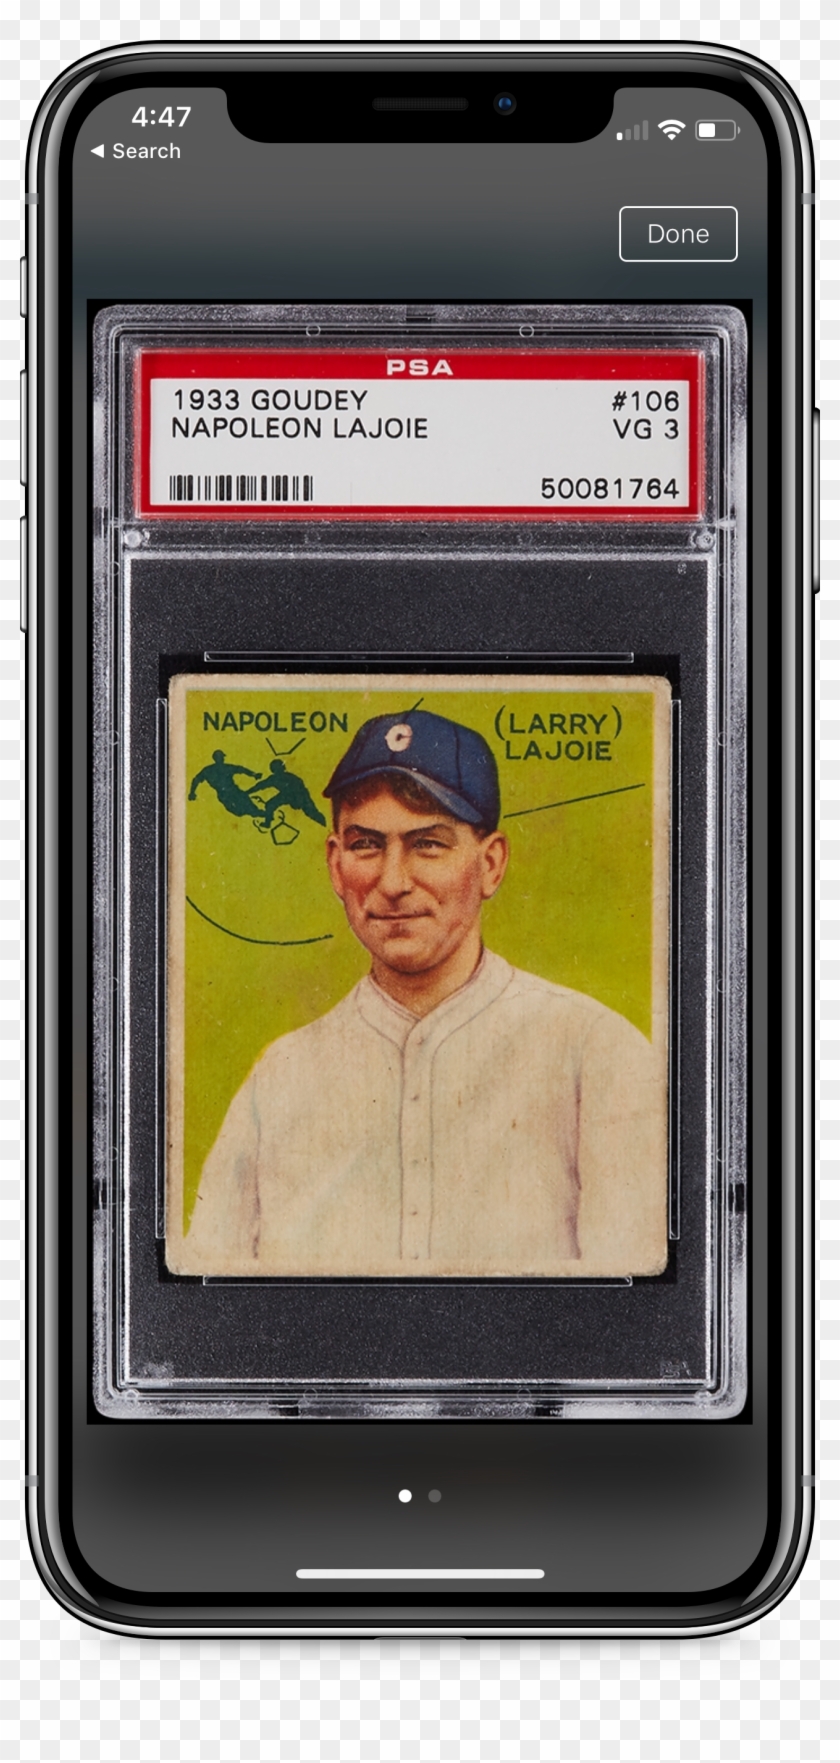 An Exceeding Scarce 1933 Goudey Nap Lajoie Is Up For - Lajoie Baseball Card Clipart #2923112